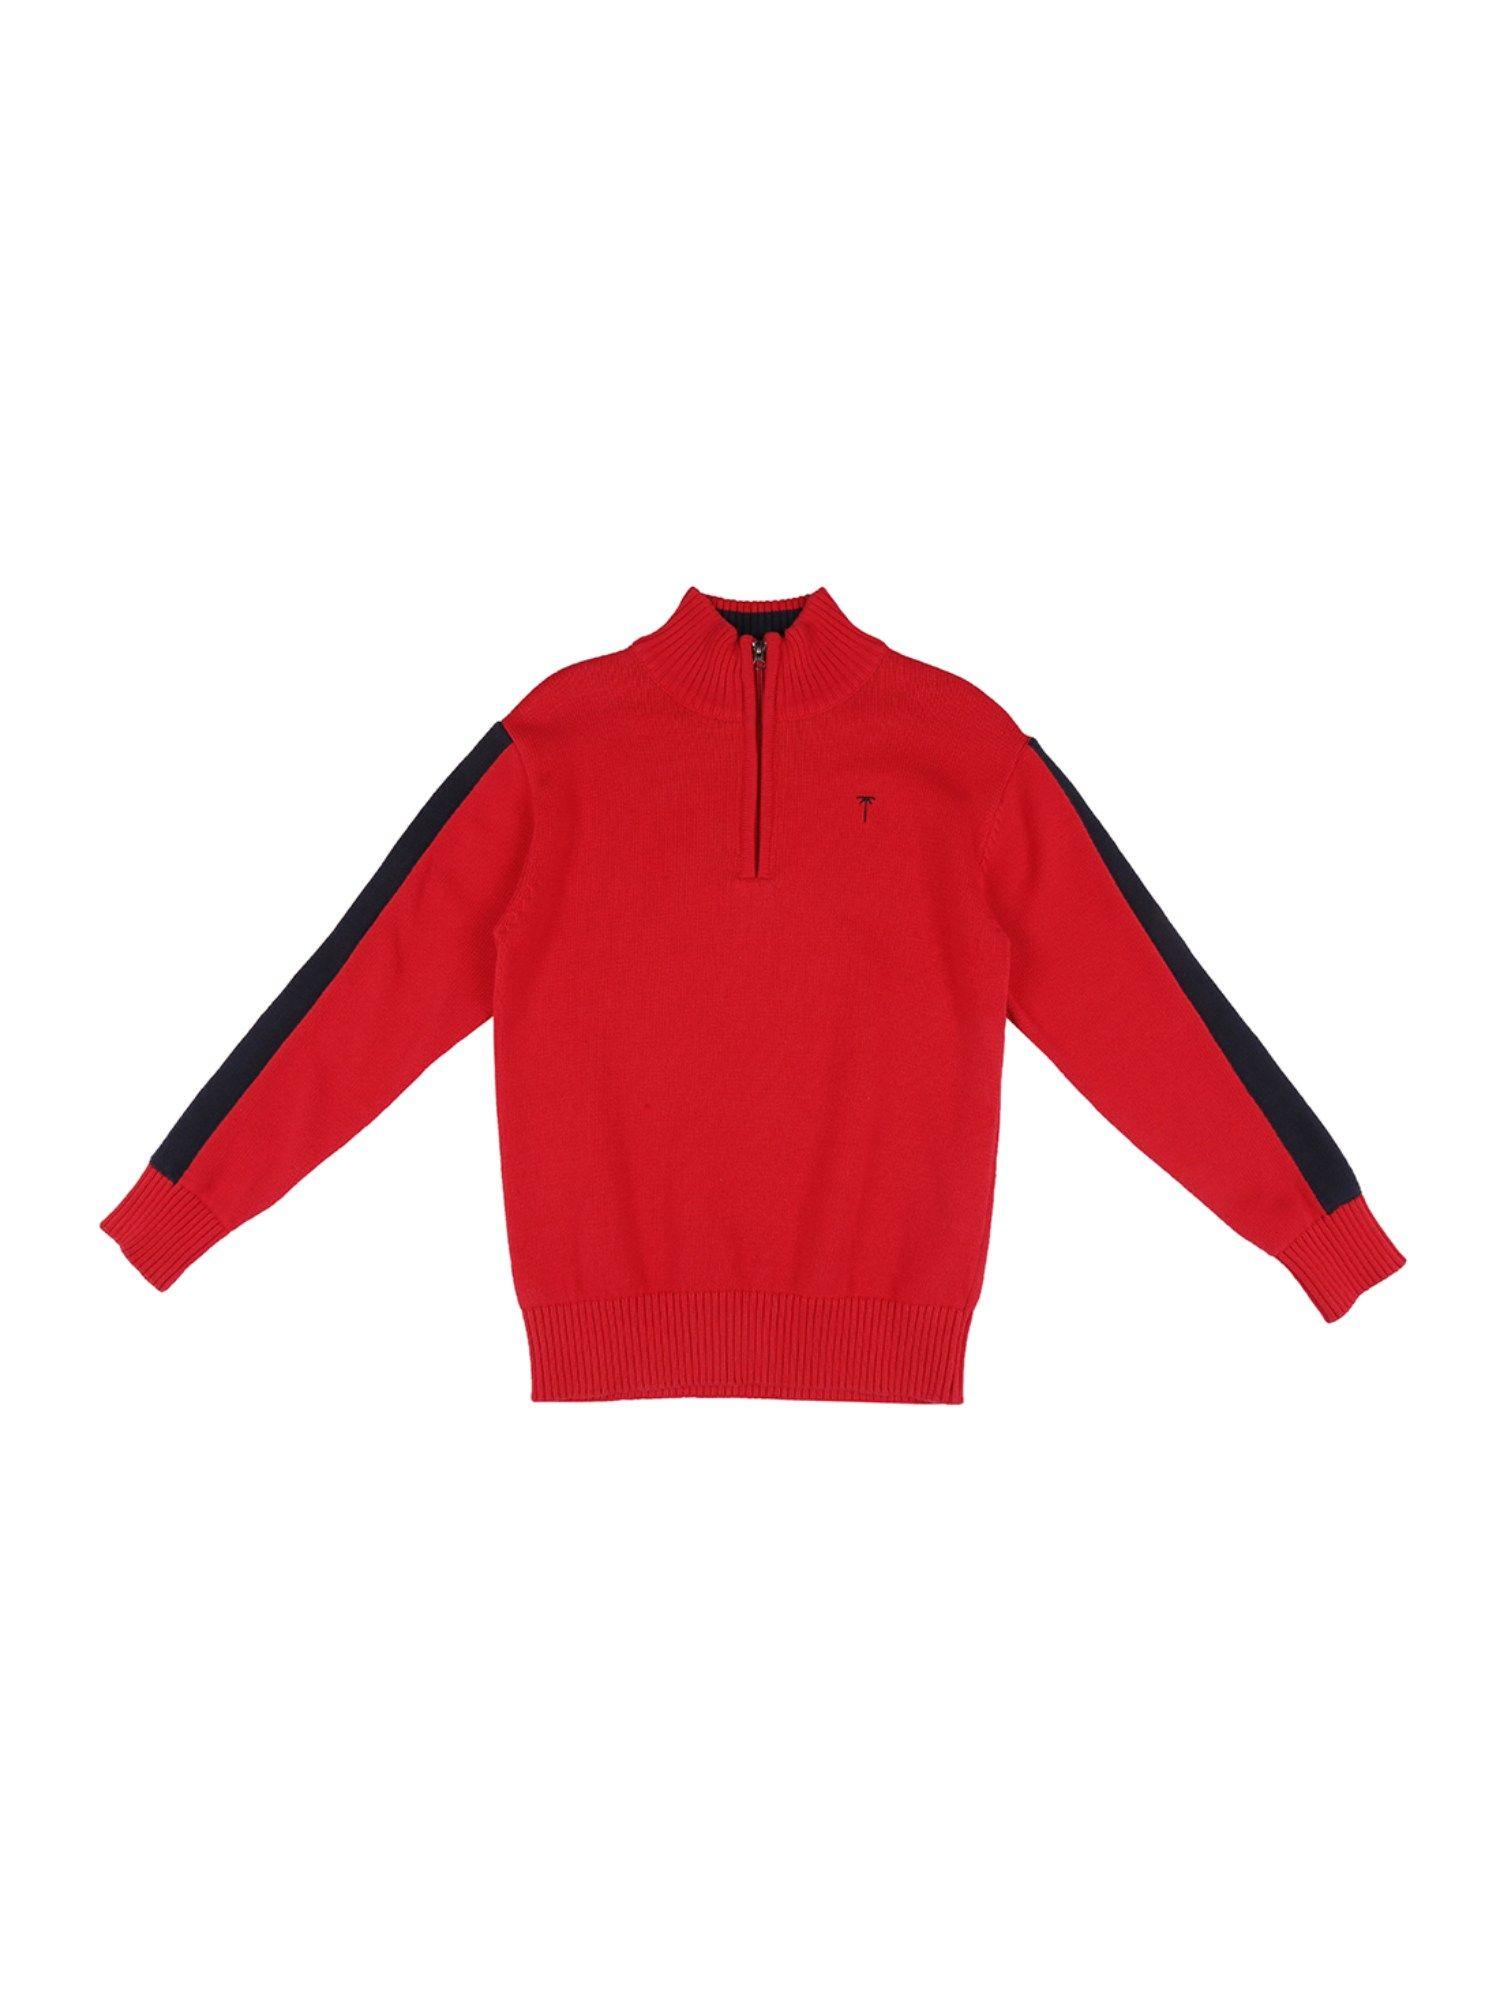 boys-red-solid-sweater-full-sleeves